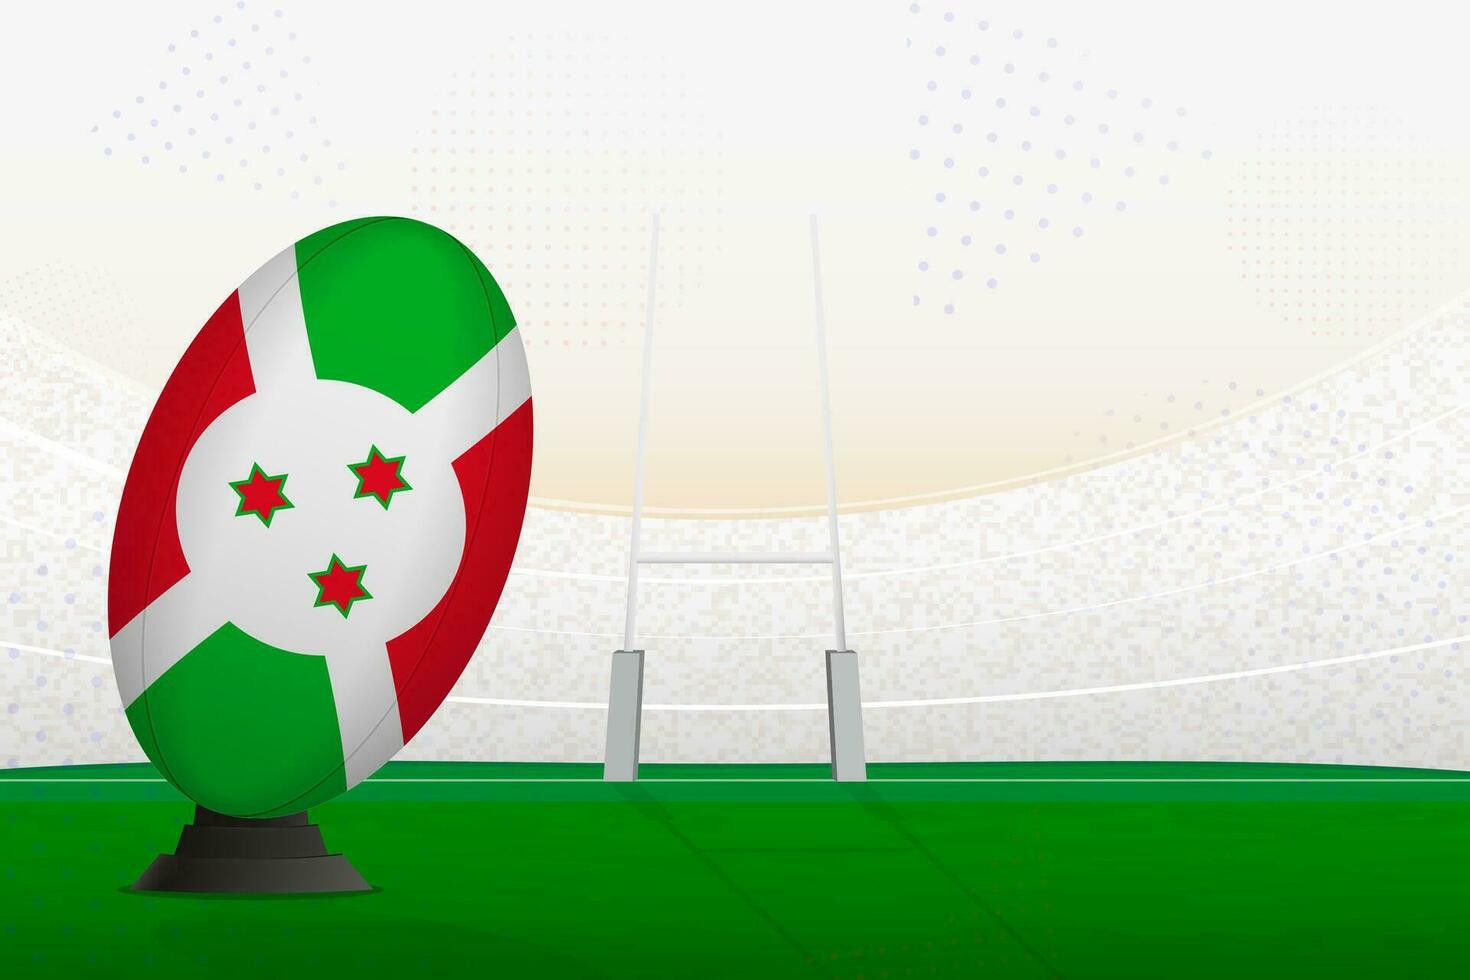 Burundi national team rugby ball on rugby stadium and goal posts, preparing for a penalty or free kick. vector